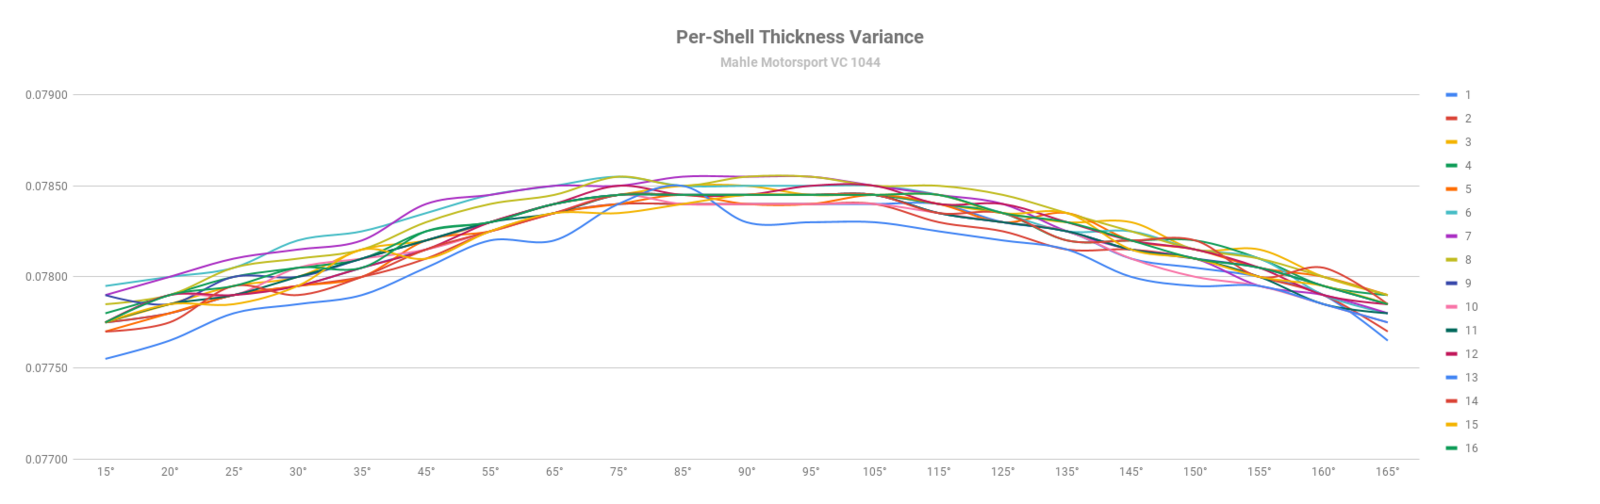 MMS VC-1044 Per-Shell Thickness Variance.png